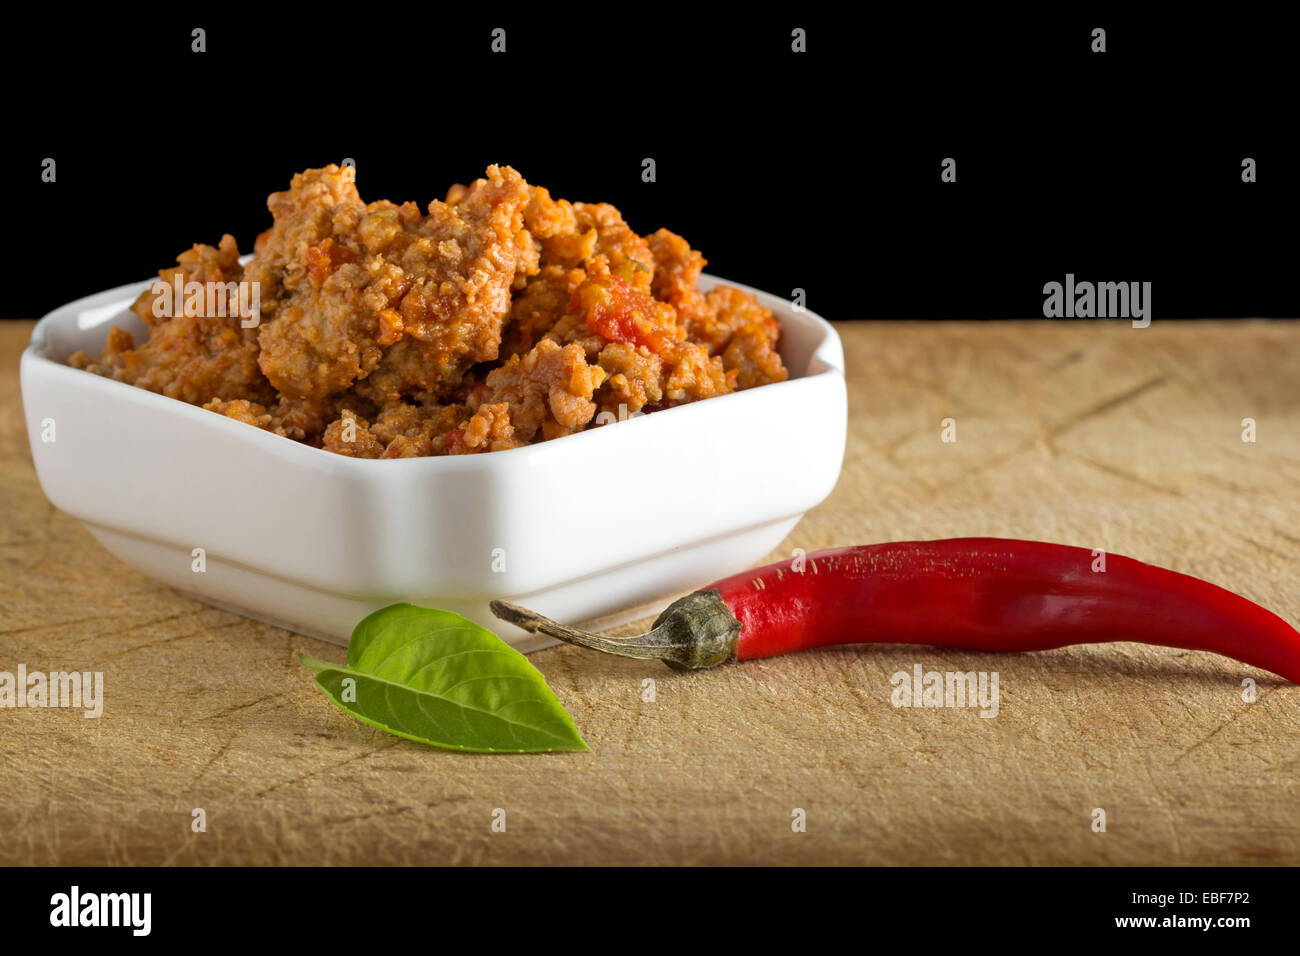 Bolognese sauce for spaghetti, red hot chilli pepper on wood Stock Photo